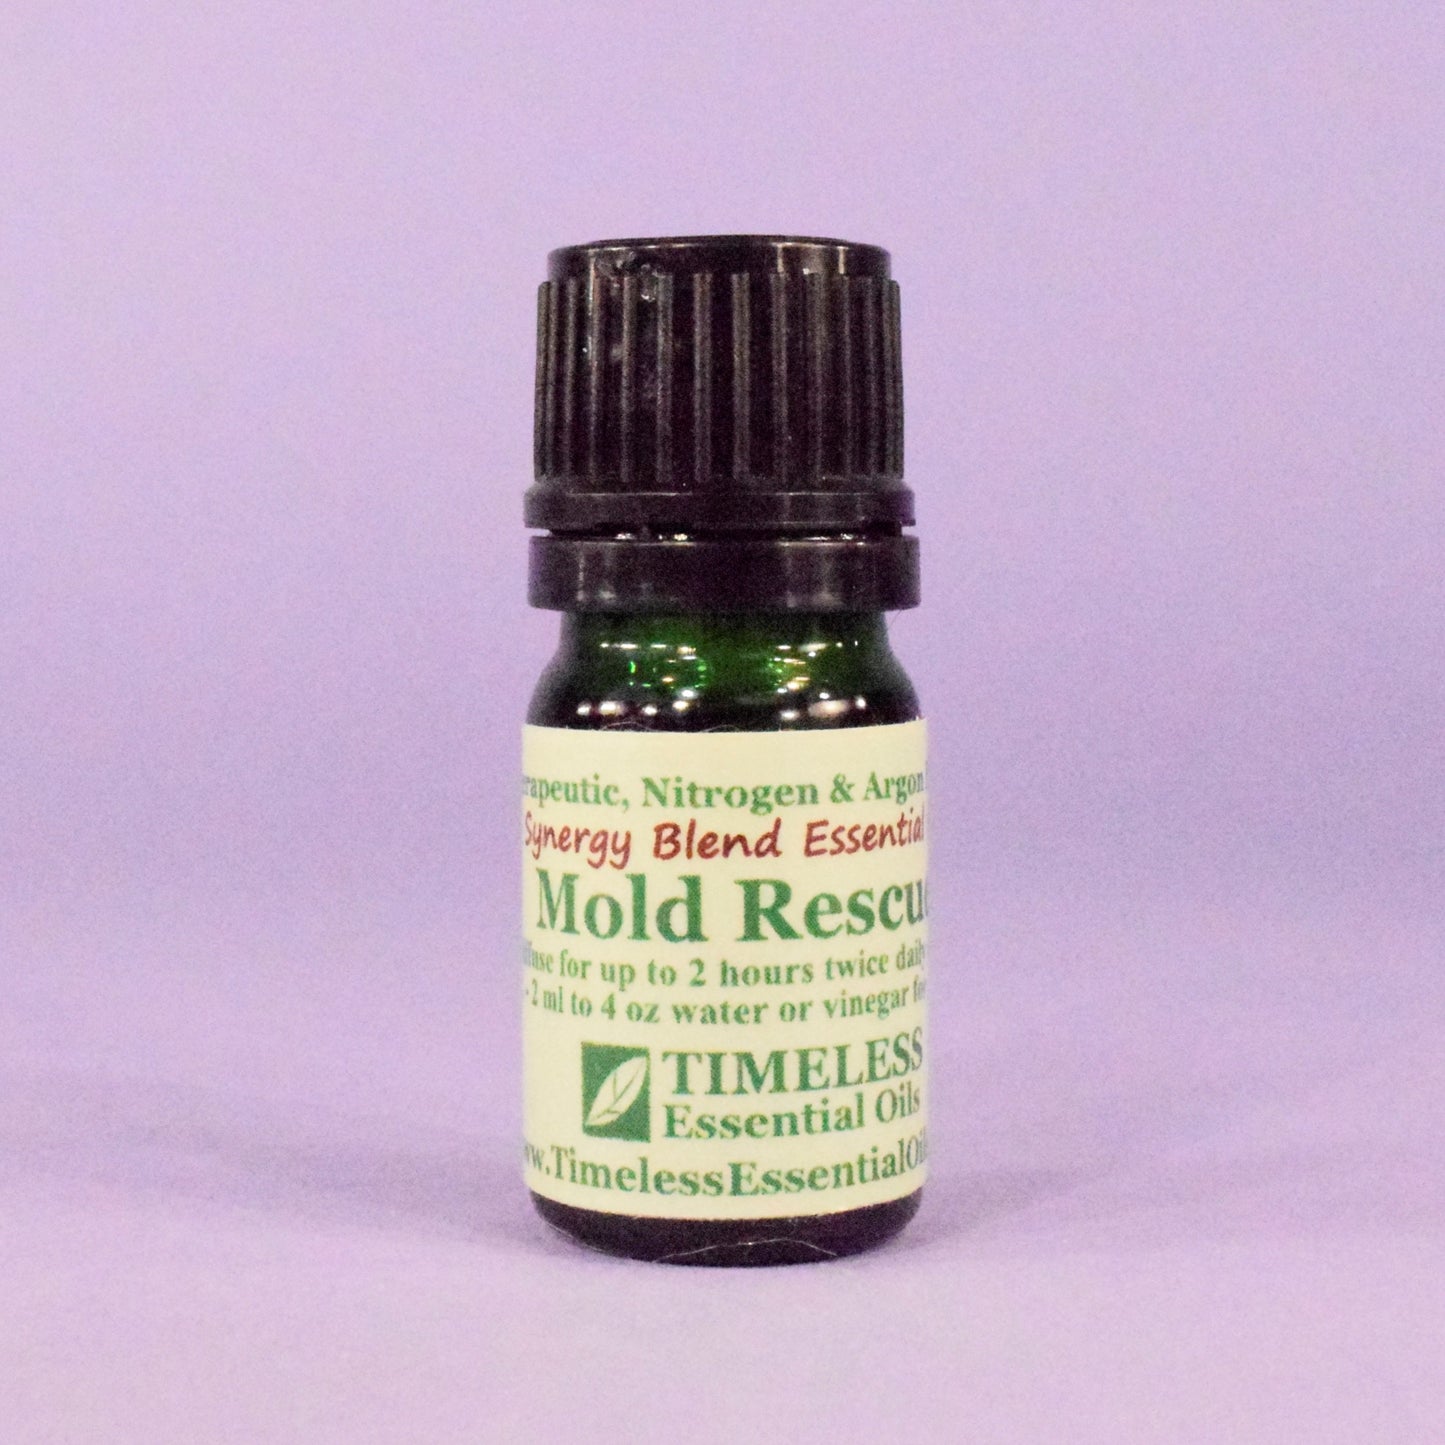 TIMELESS Essential Oils Mold Rescue Synergy Blend helps eliminate musty household odors and reduce mold spores